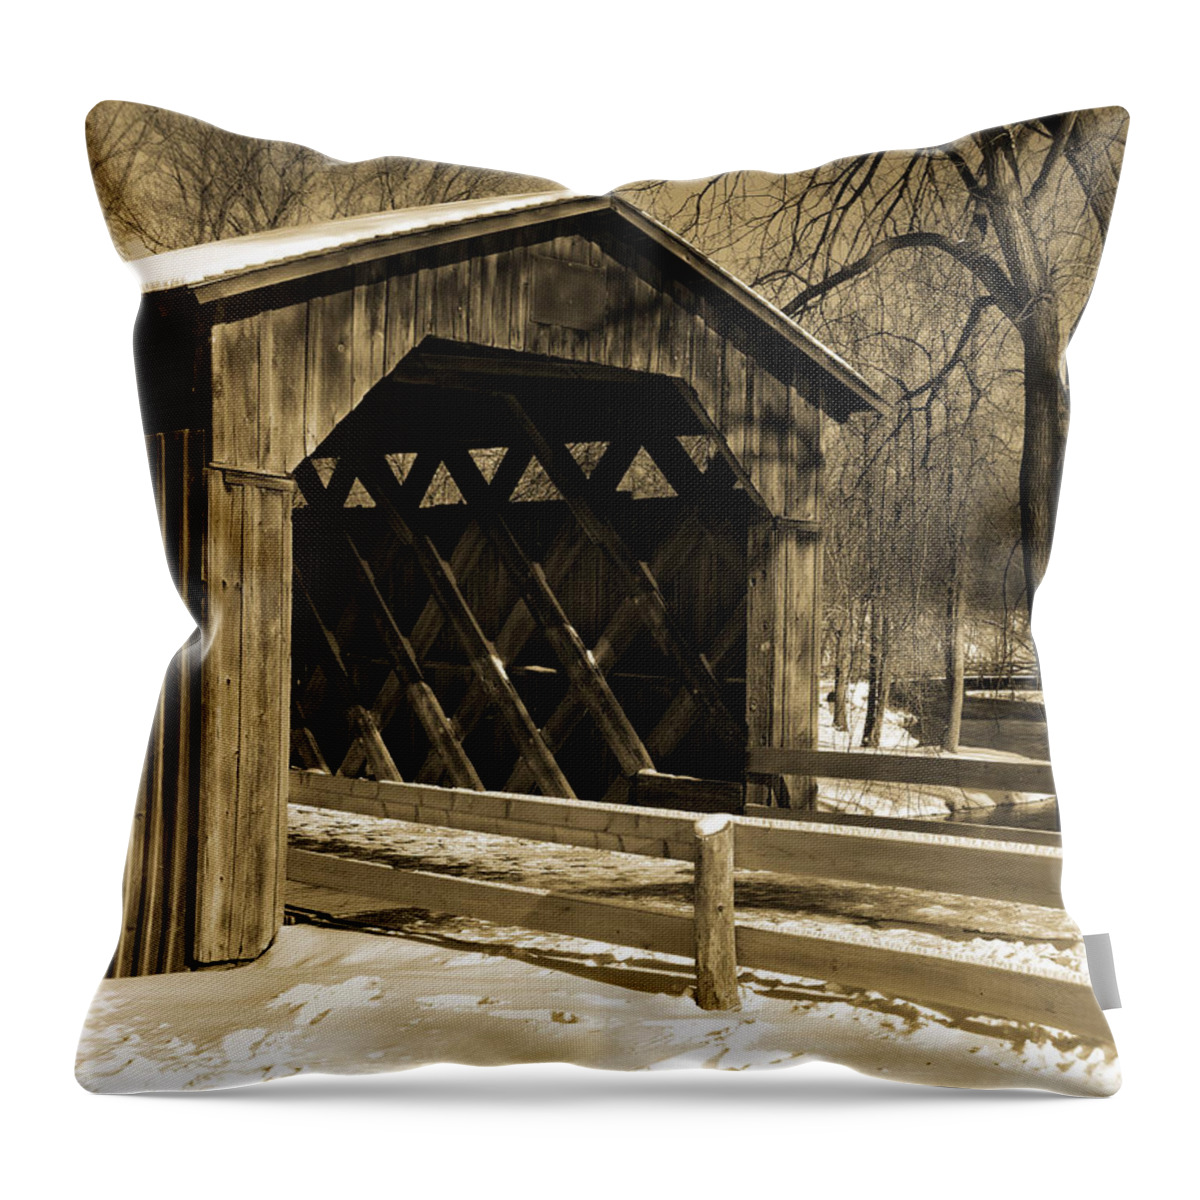 Covered Bridge Throw Pillow featuring the photograph Cedarburg Covered Bridge in Winter Sepia by David T Wilkinson